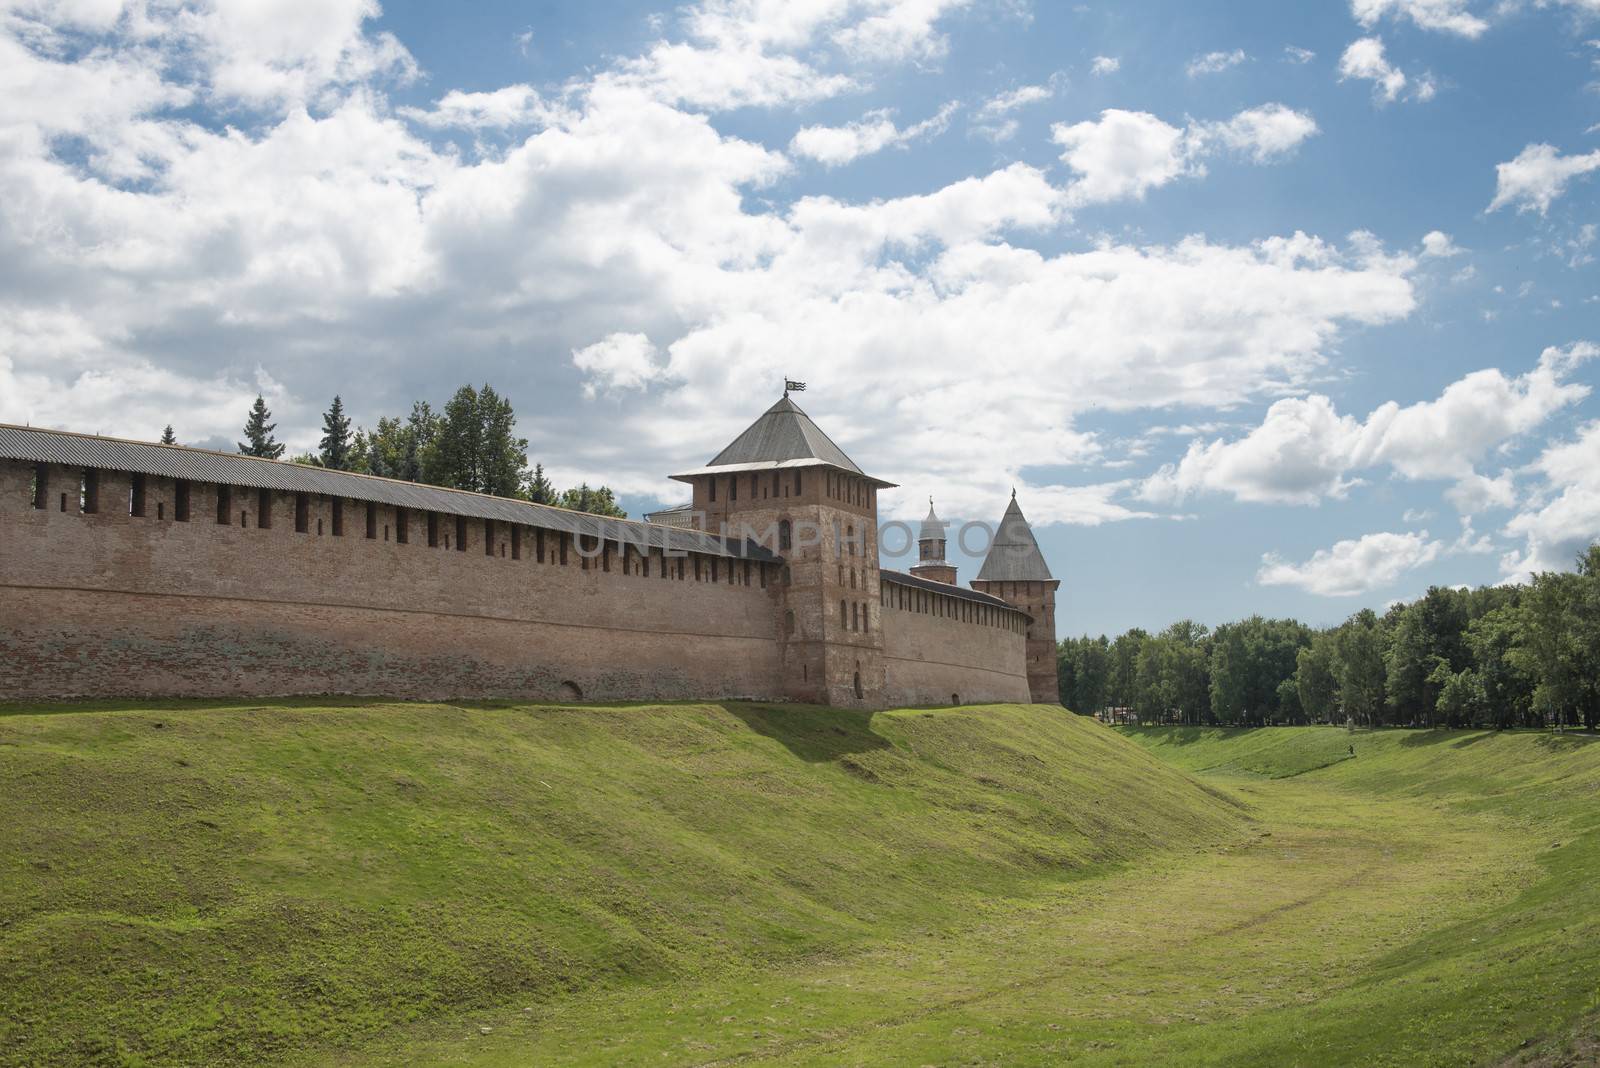 The heart of Veliky Novgorod has always been the Kremlin, or Detinets, as they called it in old times. The building of Novgorod fortress is first mentioned in chronicles around 1044. For centuries the Kremlin functioned as an administrative, civic and religious center of Novgorod Land.